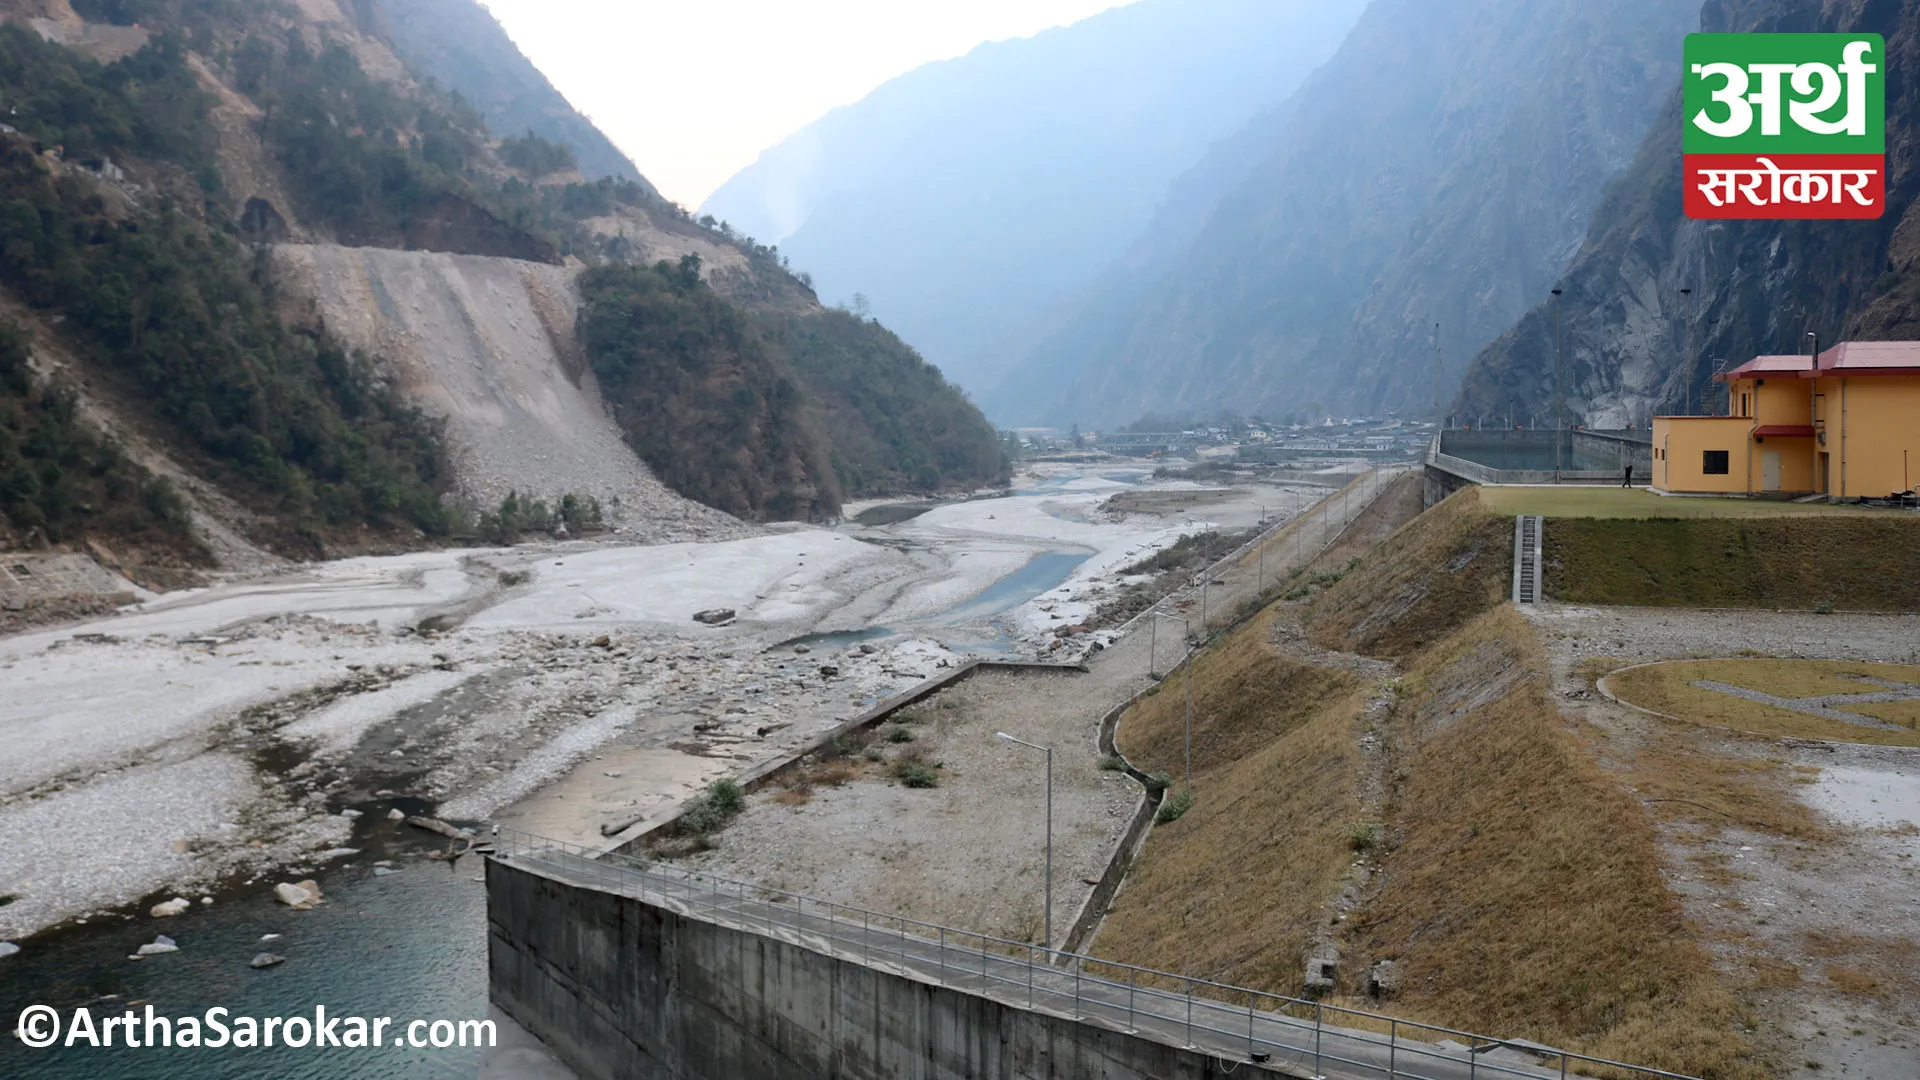 Upper Tamakoshi Hydropower records loss in Q2 despite increased electricity sales